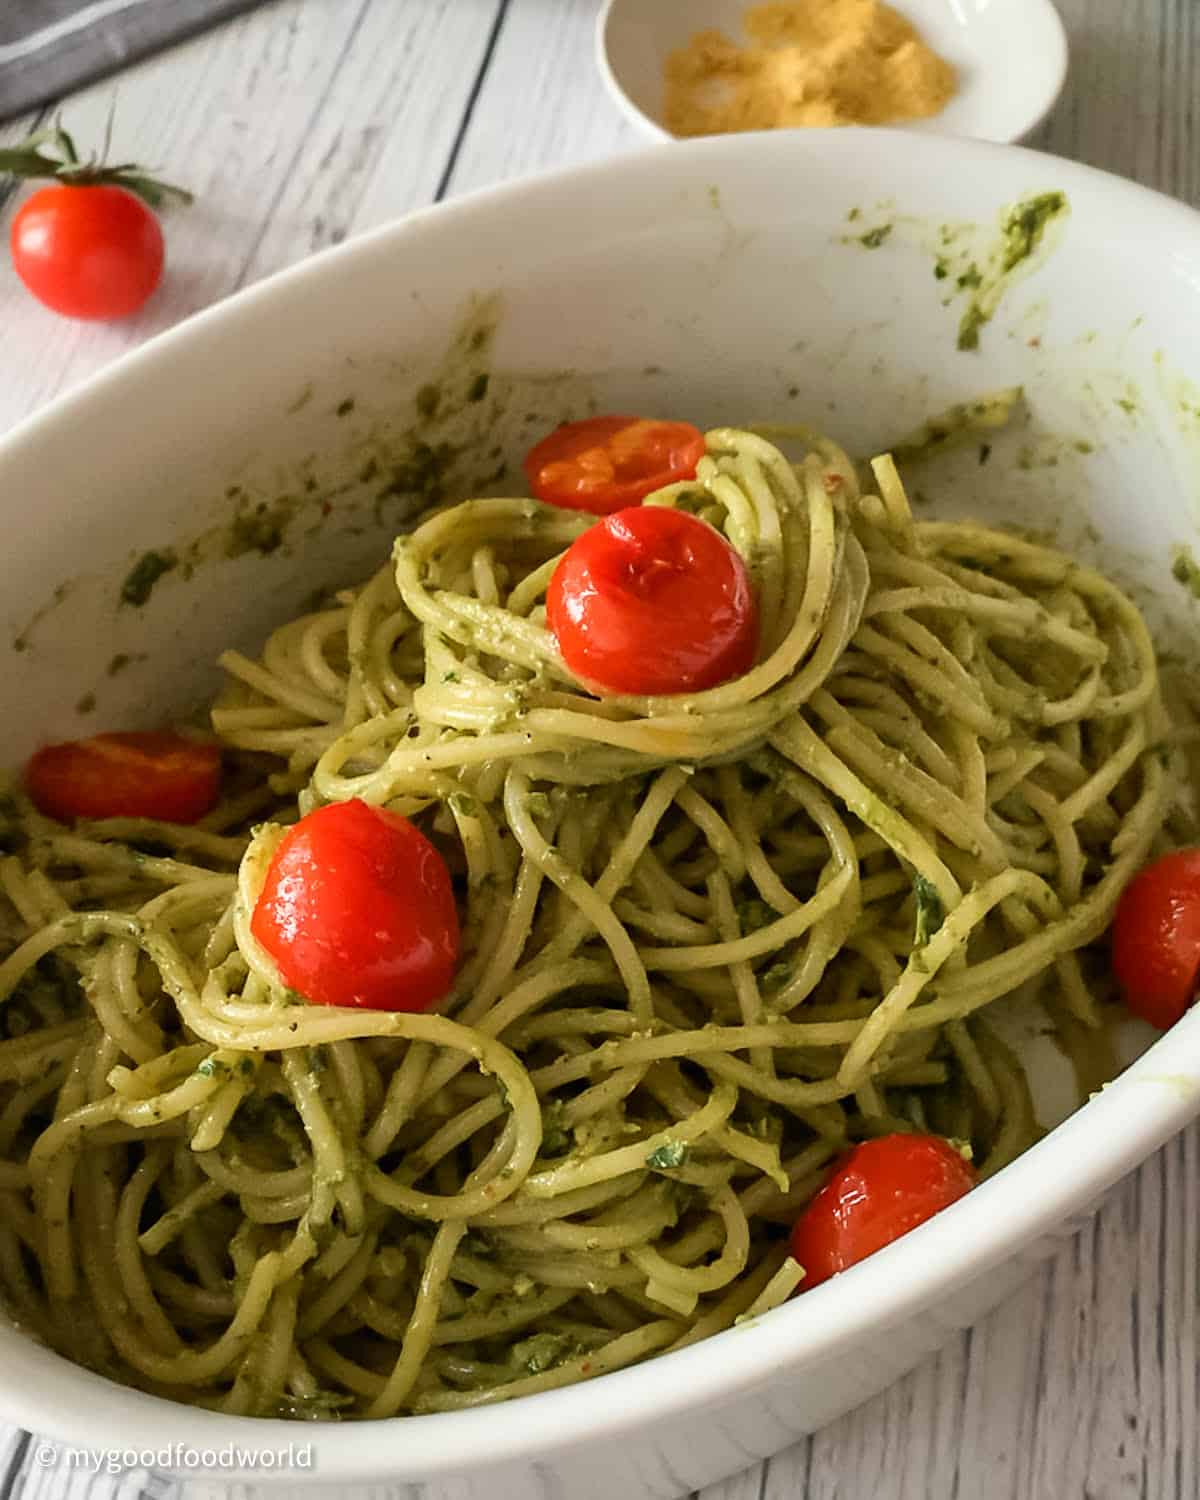 The dish pasta al pesto with pan roasted tomatoes is placed in a white oval dish. Next to the bowl, is placed one cherry tomato and some nutritional yeast in a small white colored bowl.